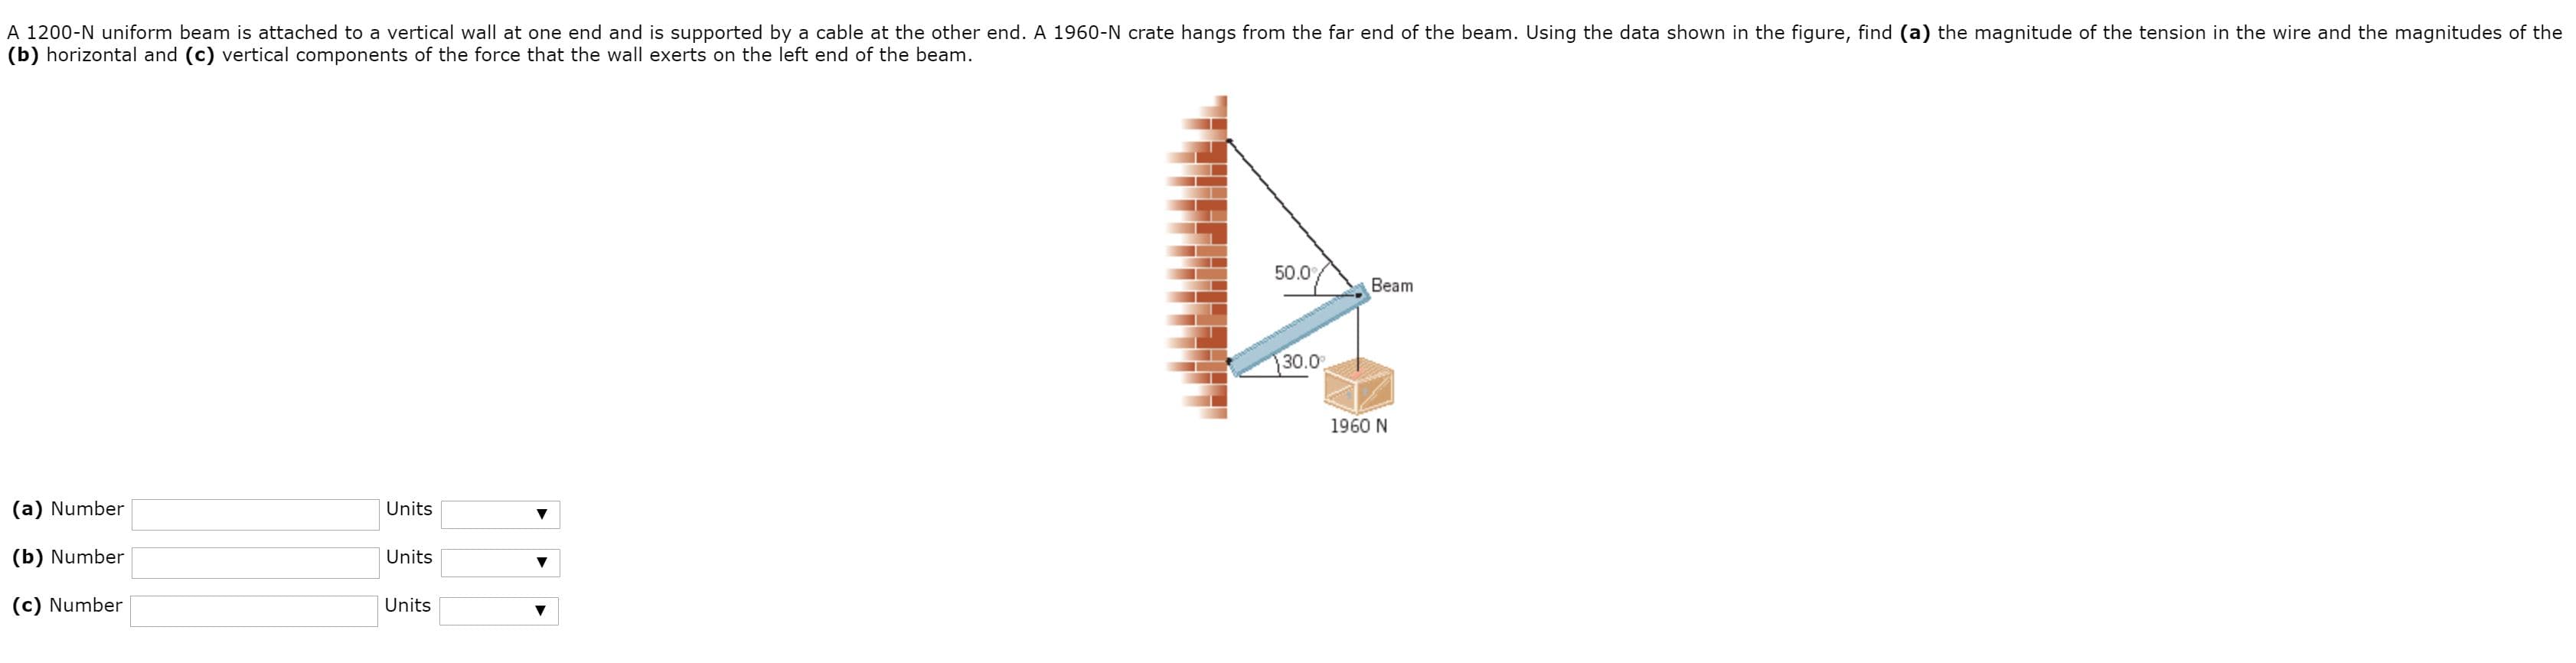 A 1200-N uniform beam is attached to a vertical wall at one end and is supported by a cable at the other end. A 1960-N crate hangs from the far end of the beam. Using the data shown in the figure, find (a) the magnitude of the tension in the wire and the magnitudes of the
(b) horizontal and (c) vertical components of the force that the wall exerts on the left end of the beam.
50.0
Beam
30.0
1960 N
(a) Number
Units
(b) Number
Units
(c) Number
Units
